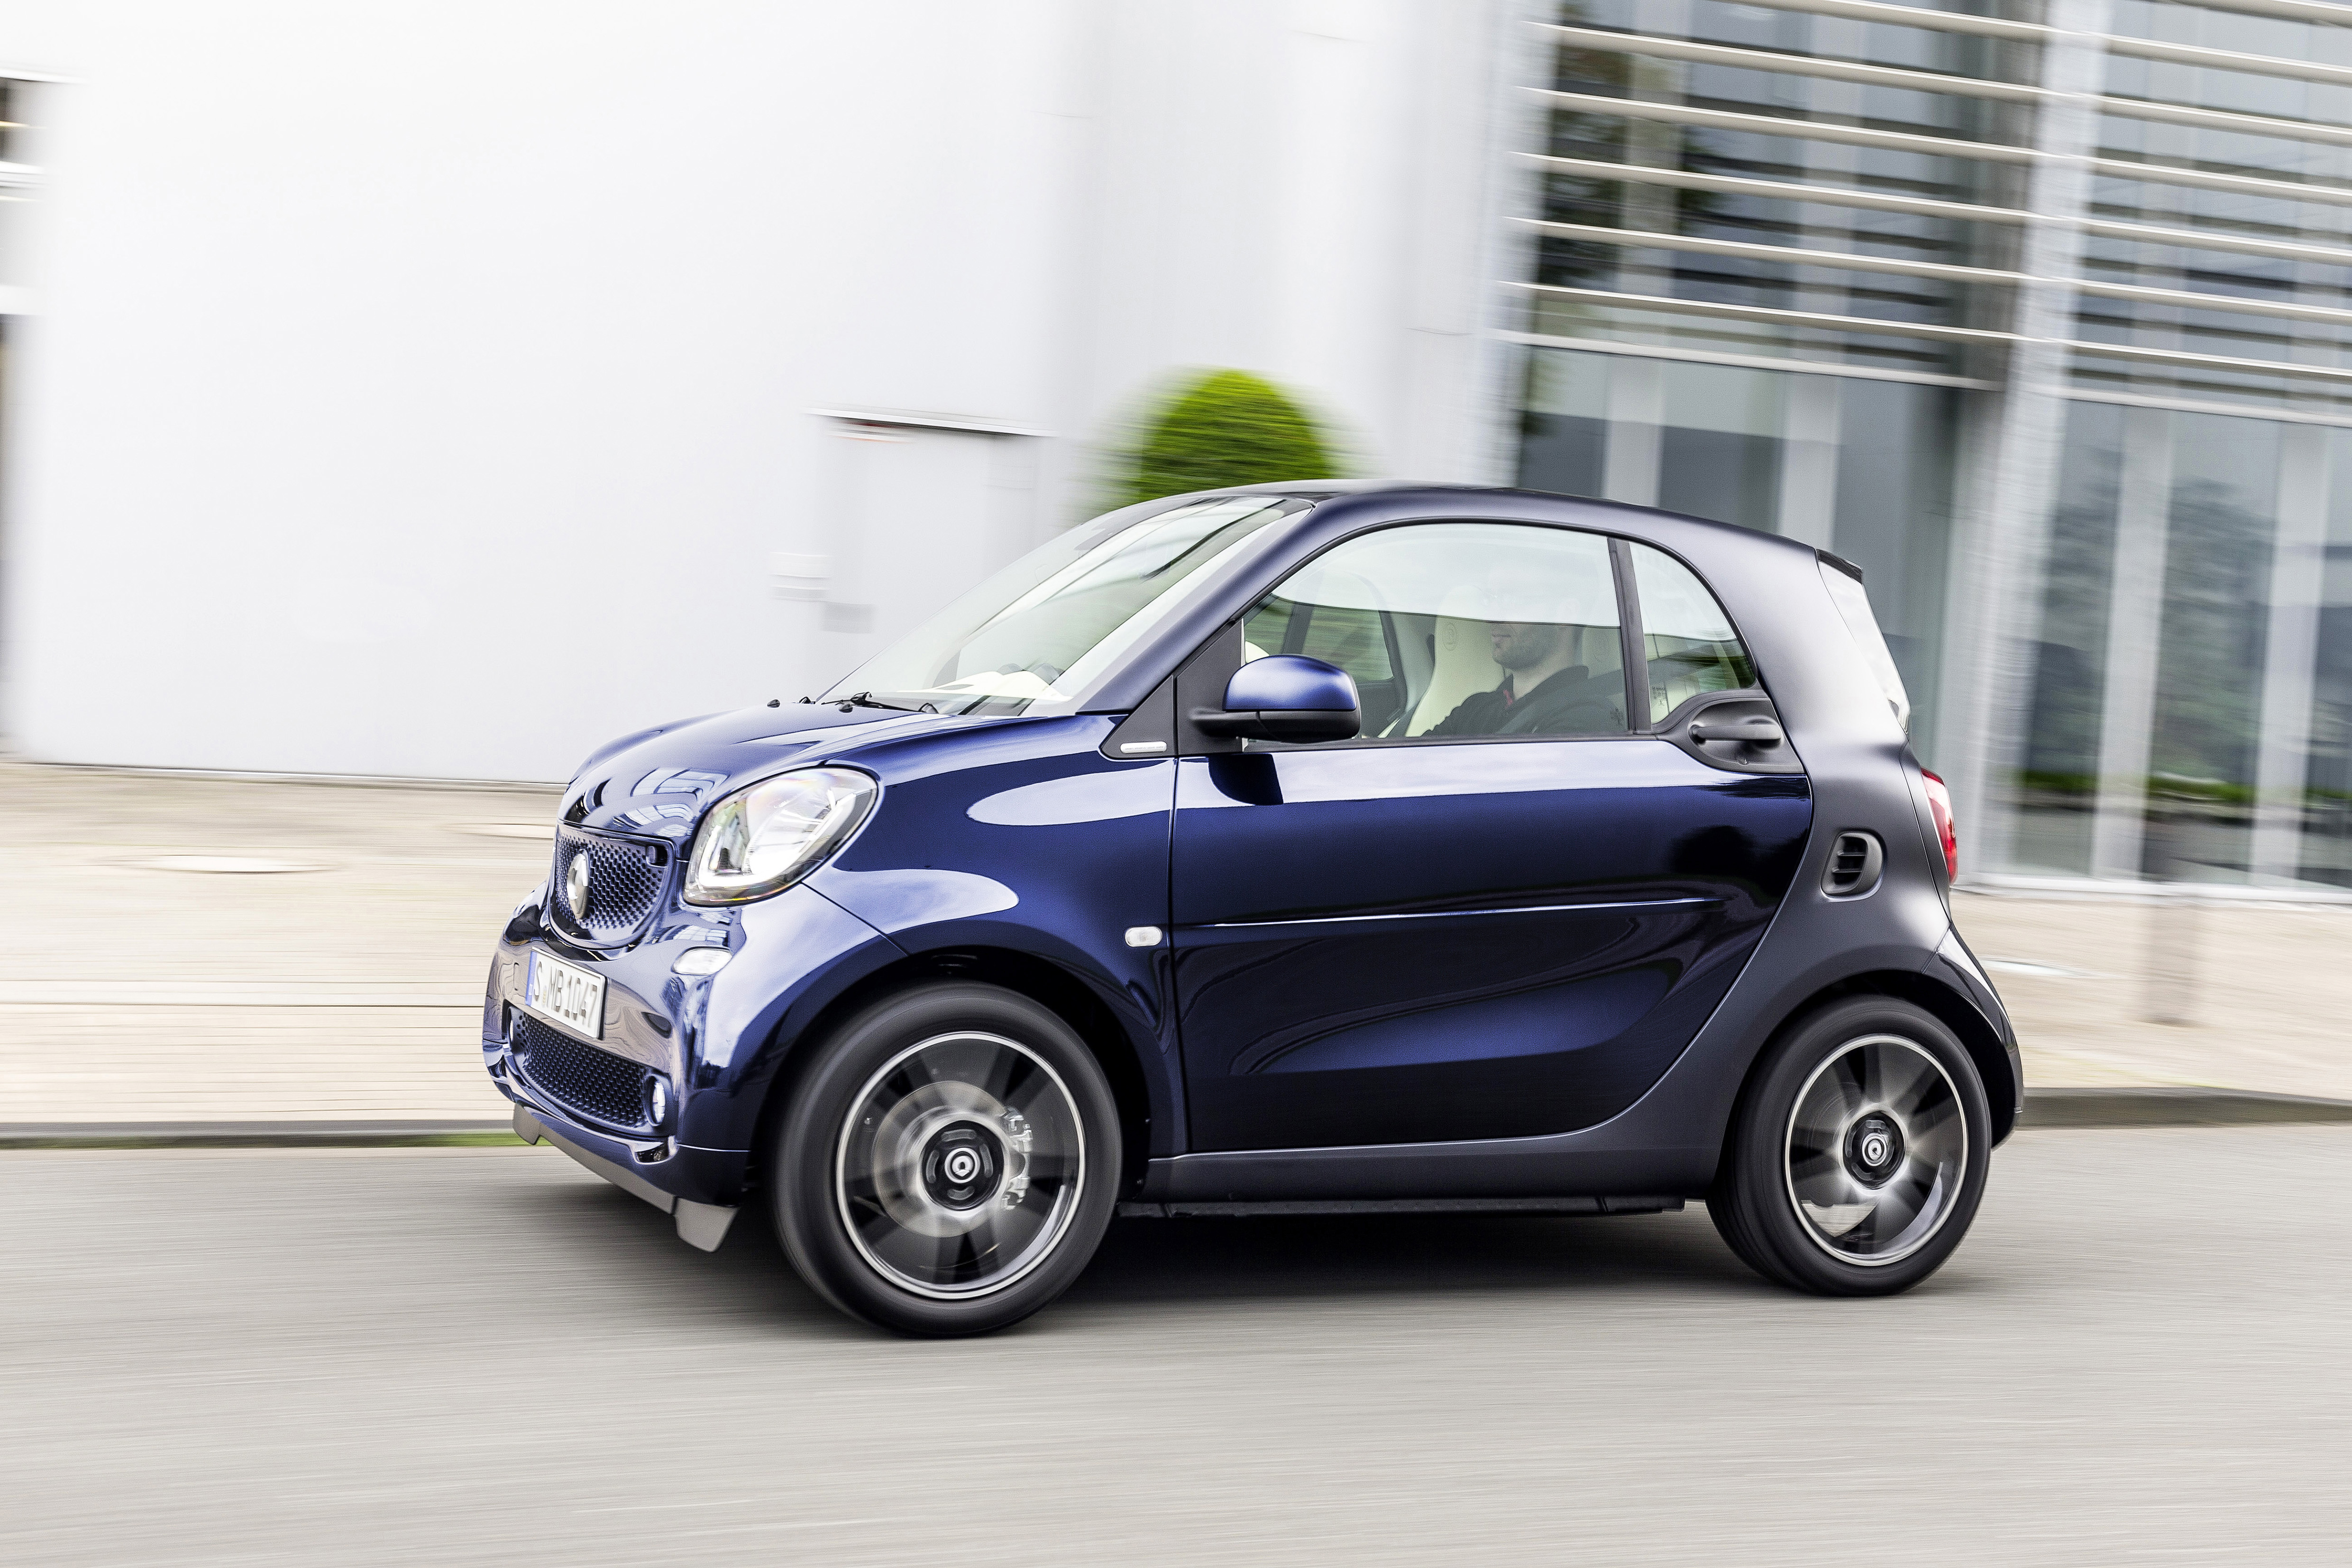 Микро картинка. Смарт Fortwo 2014. Smart Fortwo Brabus 2015. Smart Fortwo Brabus, 2014. Mercedes Smart Fortwo 2015 Size.